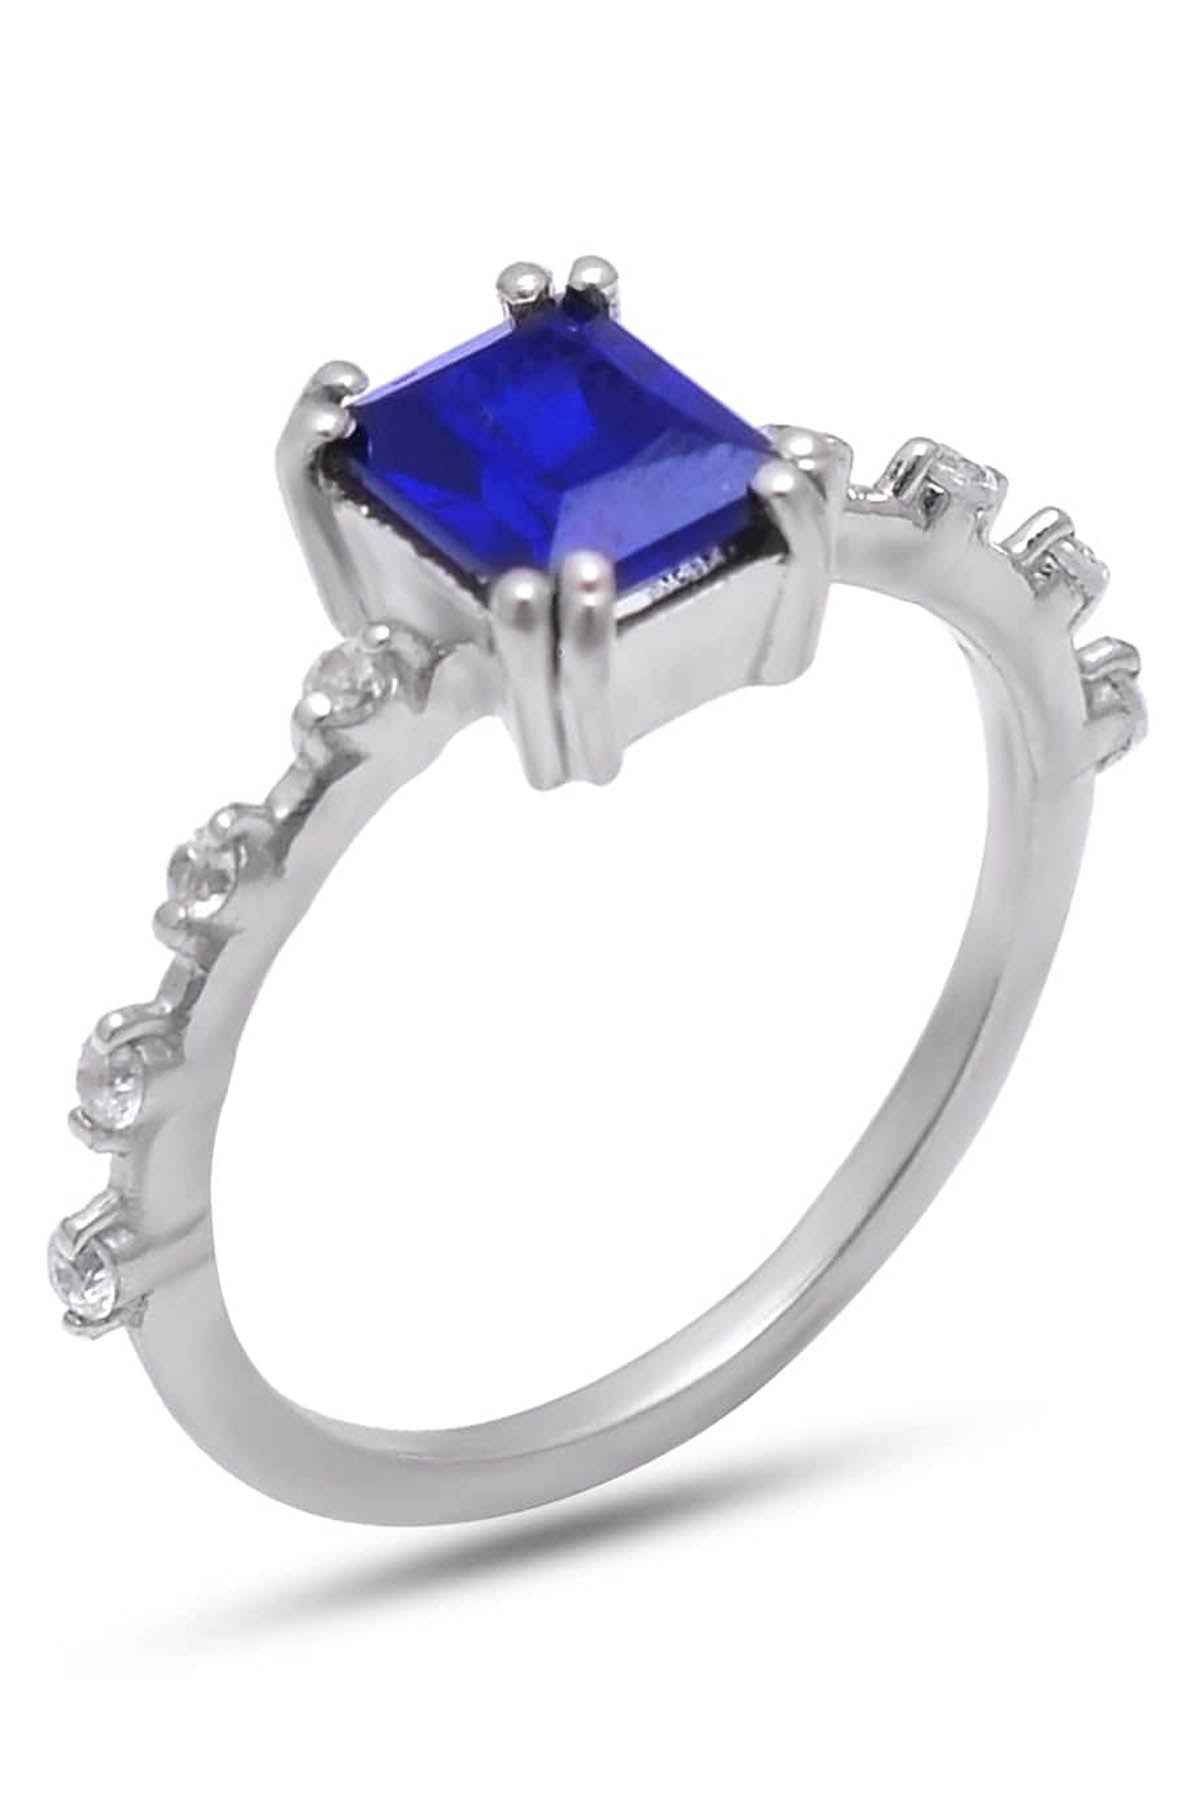 Real Sapphire Studded Ring